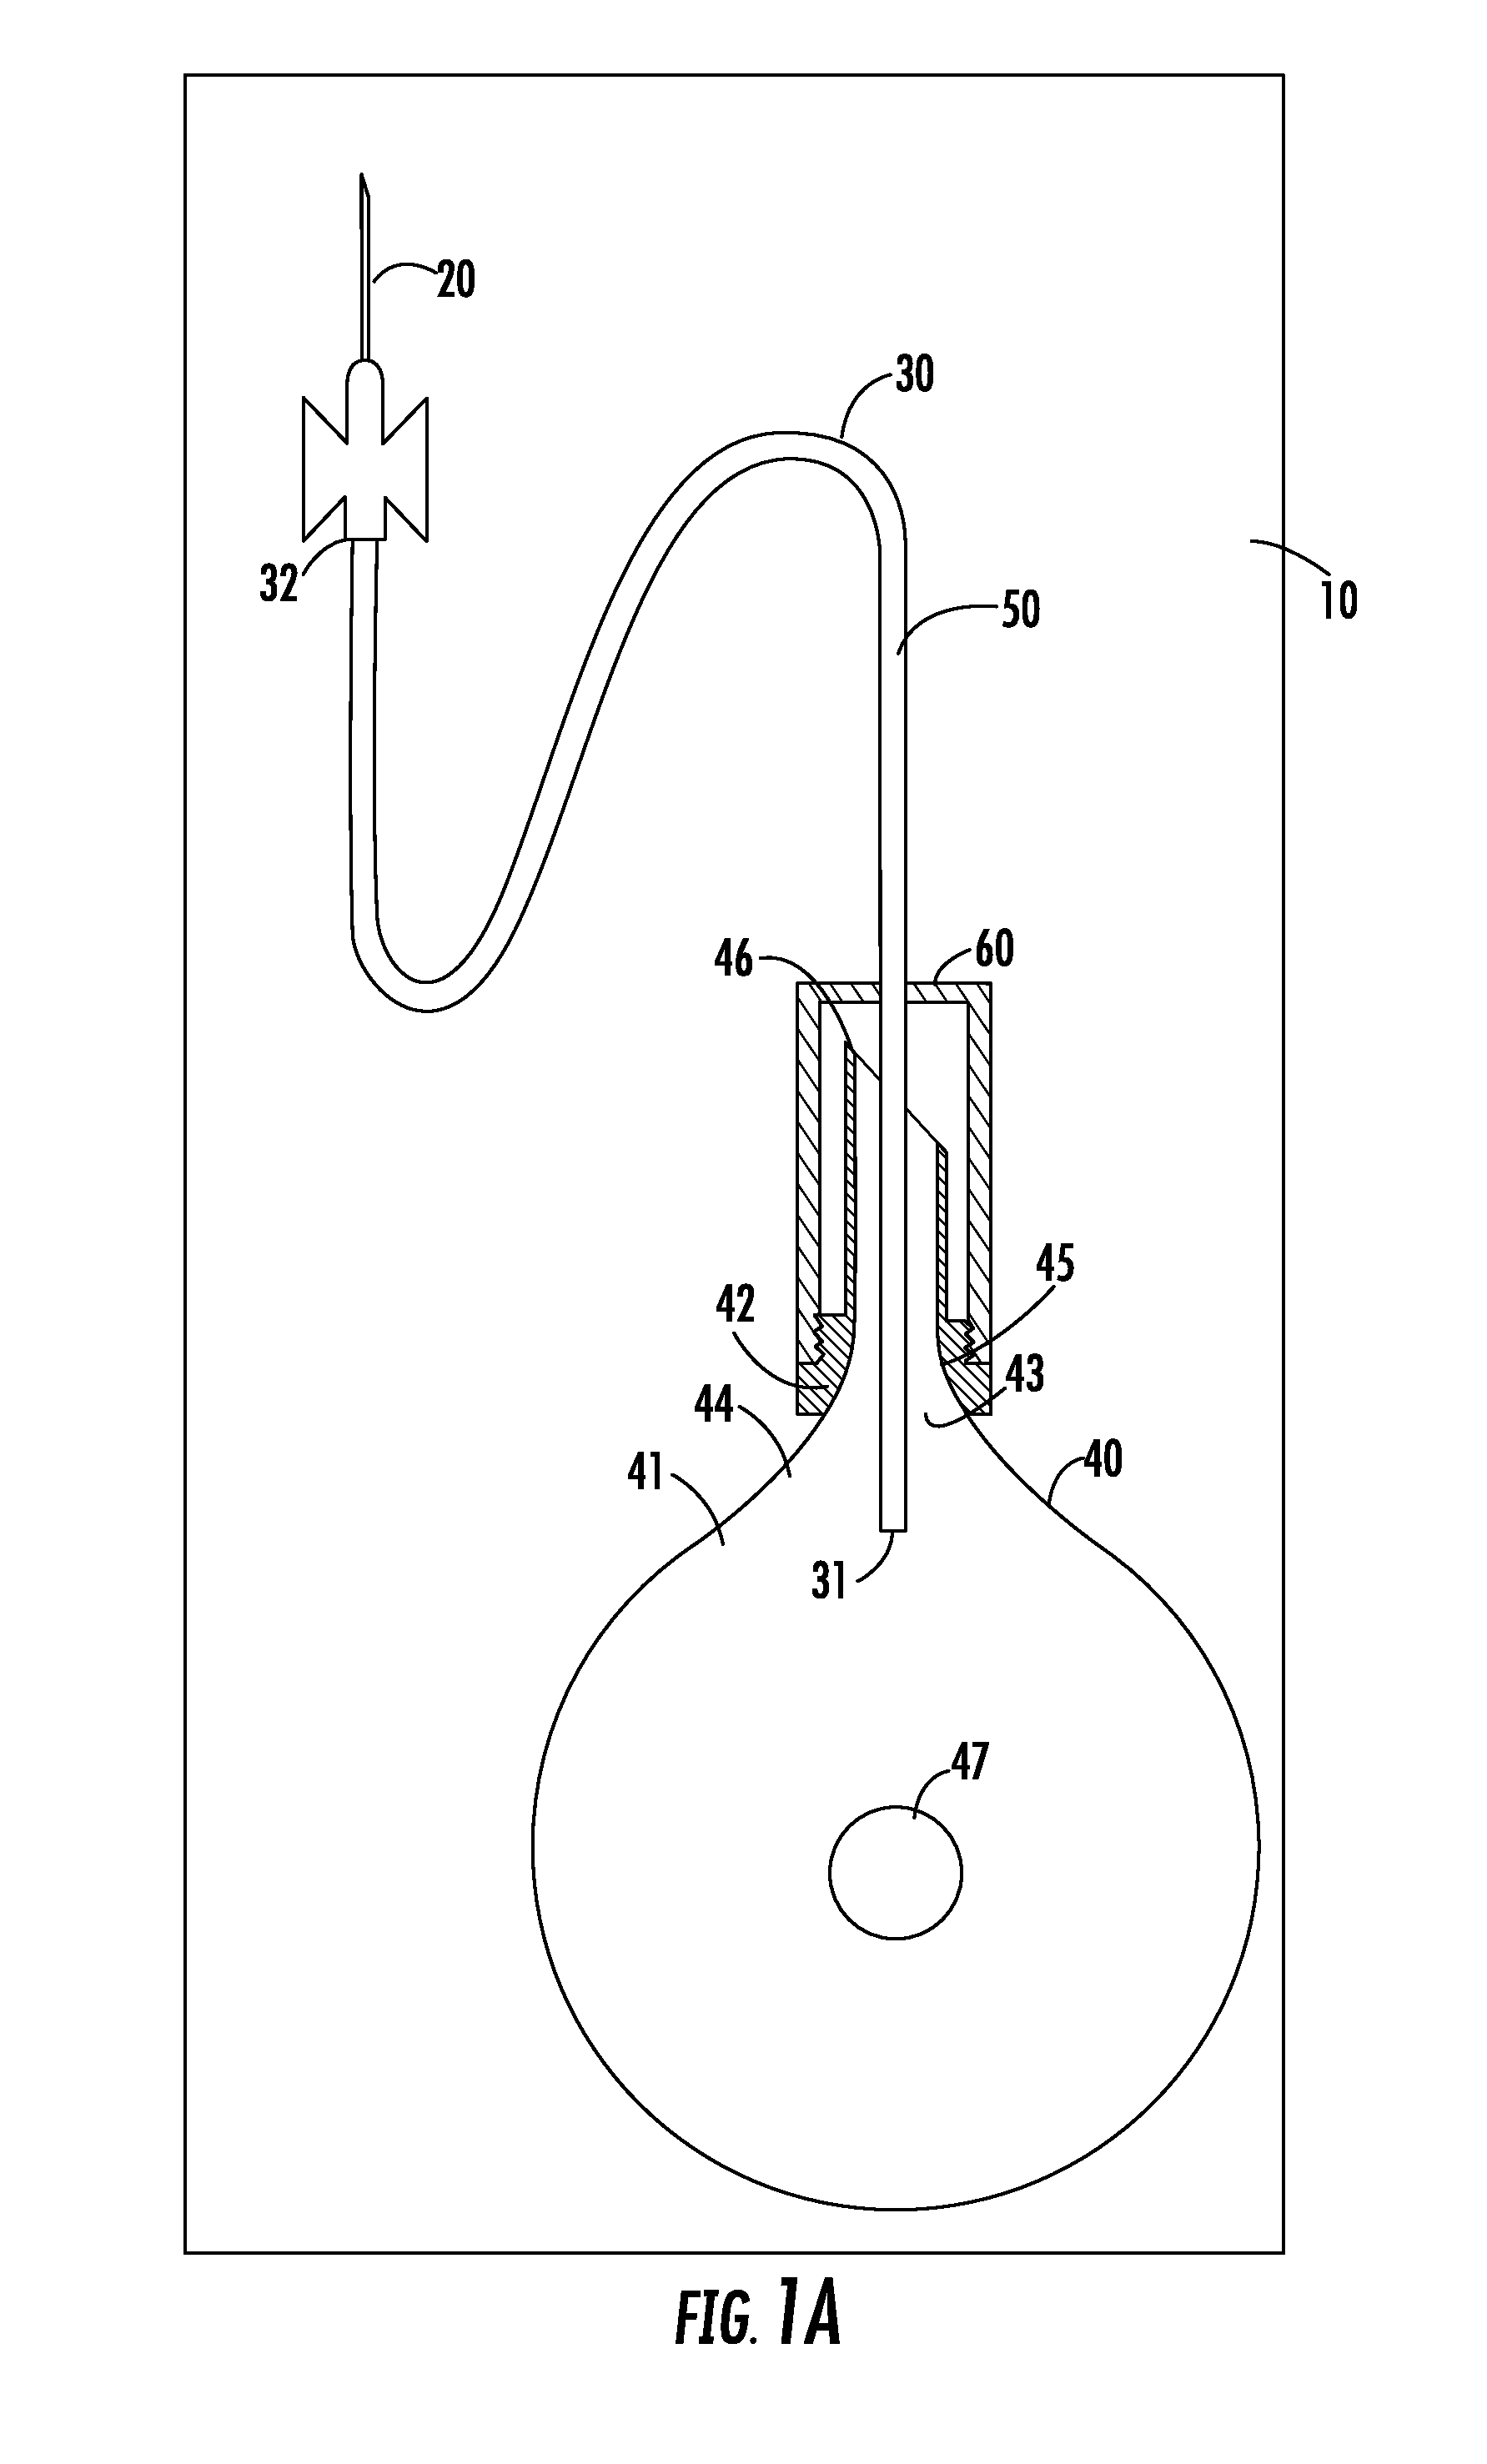 Apparatus and method for breast reconstruction and augmentation using an autologous platelet-rich fibrin matrix